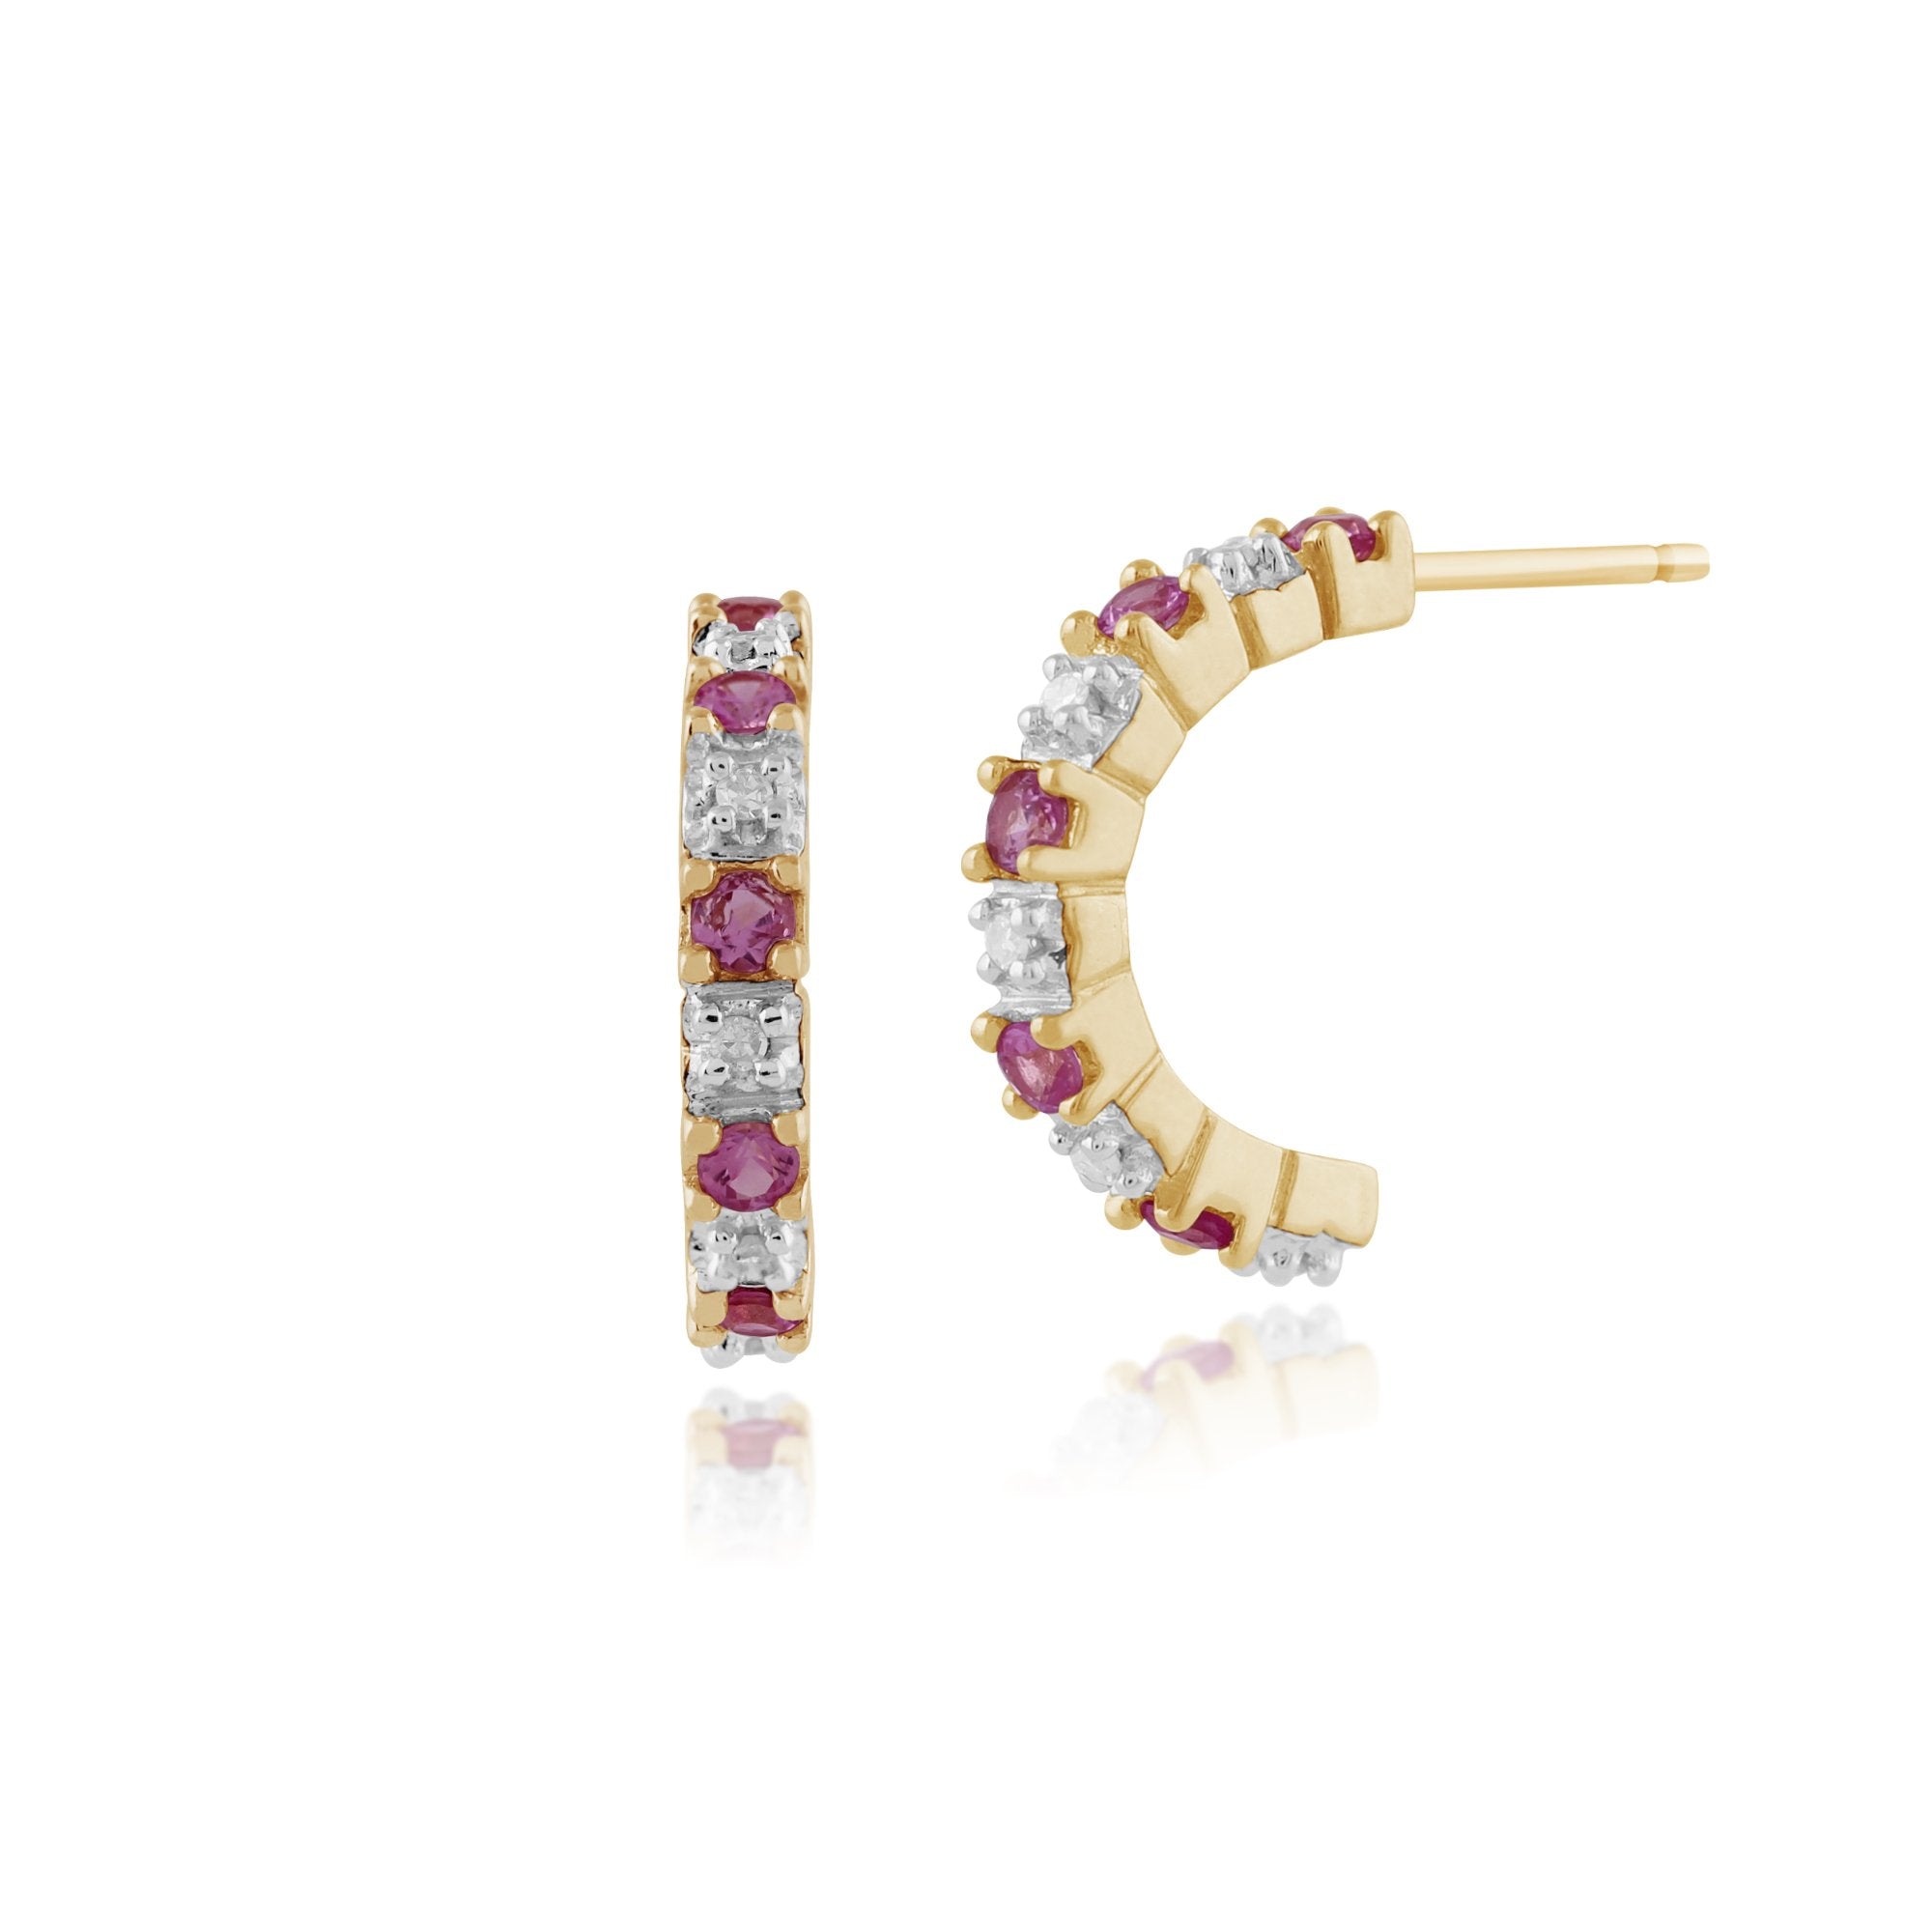 Classic Round Pink Sapphire & Diamond Half Hoop Style Earrings in 9ct Yellow Gold